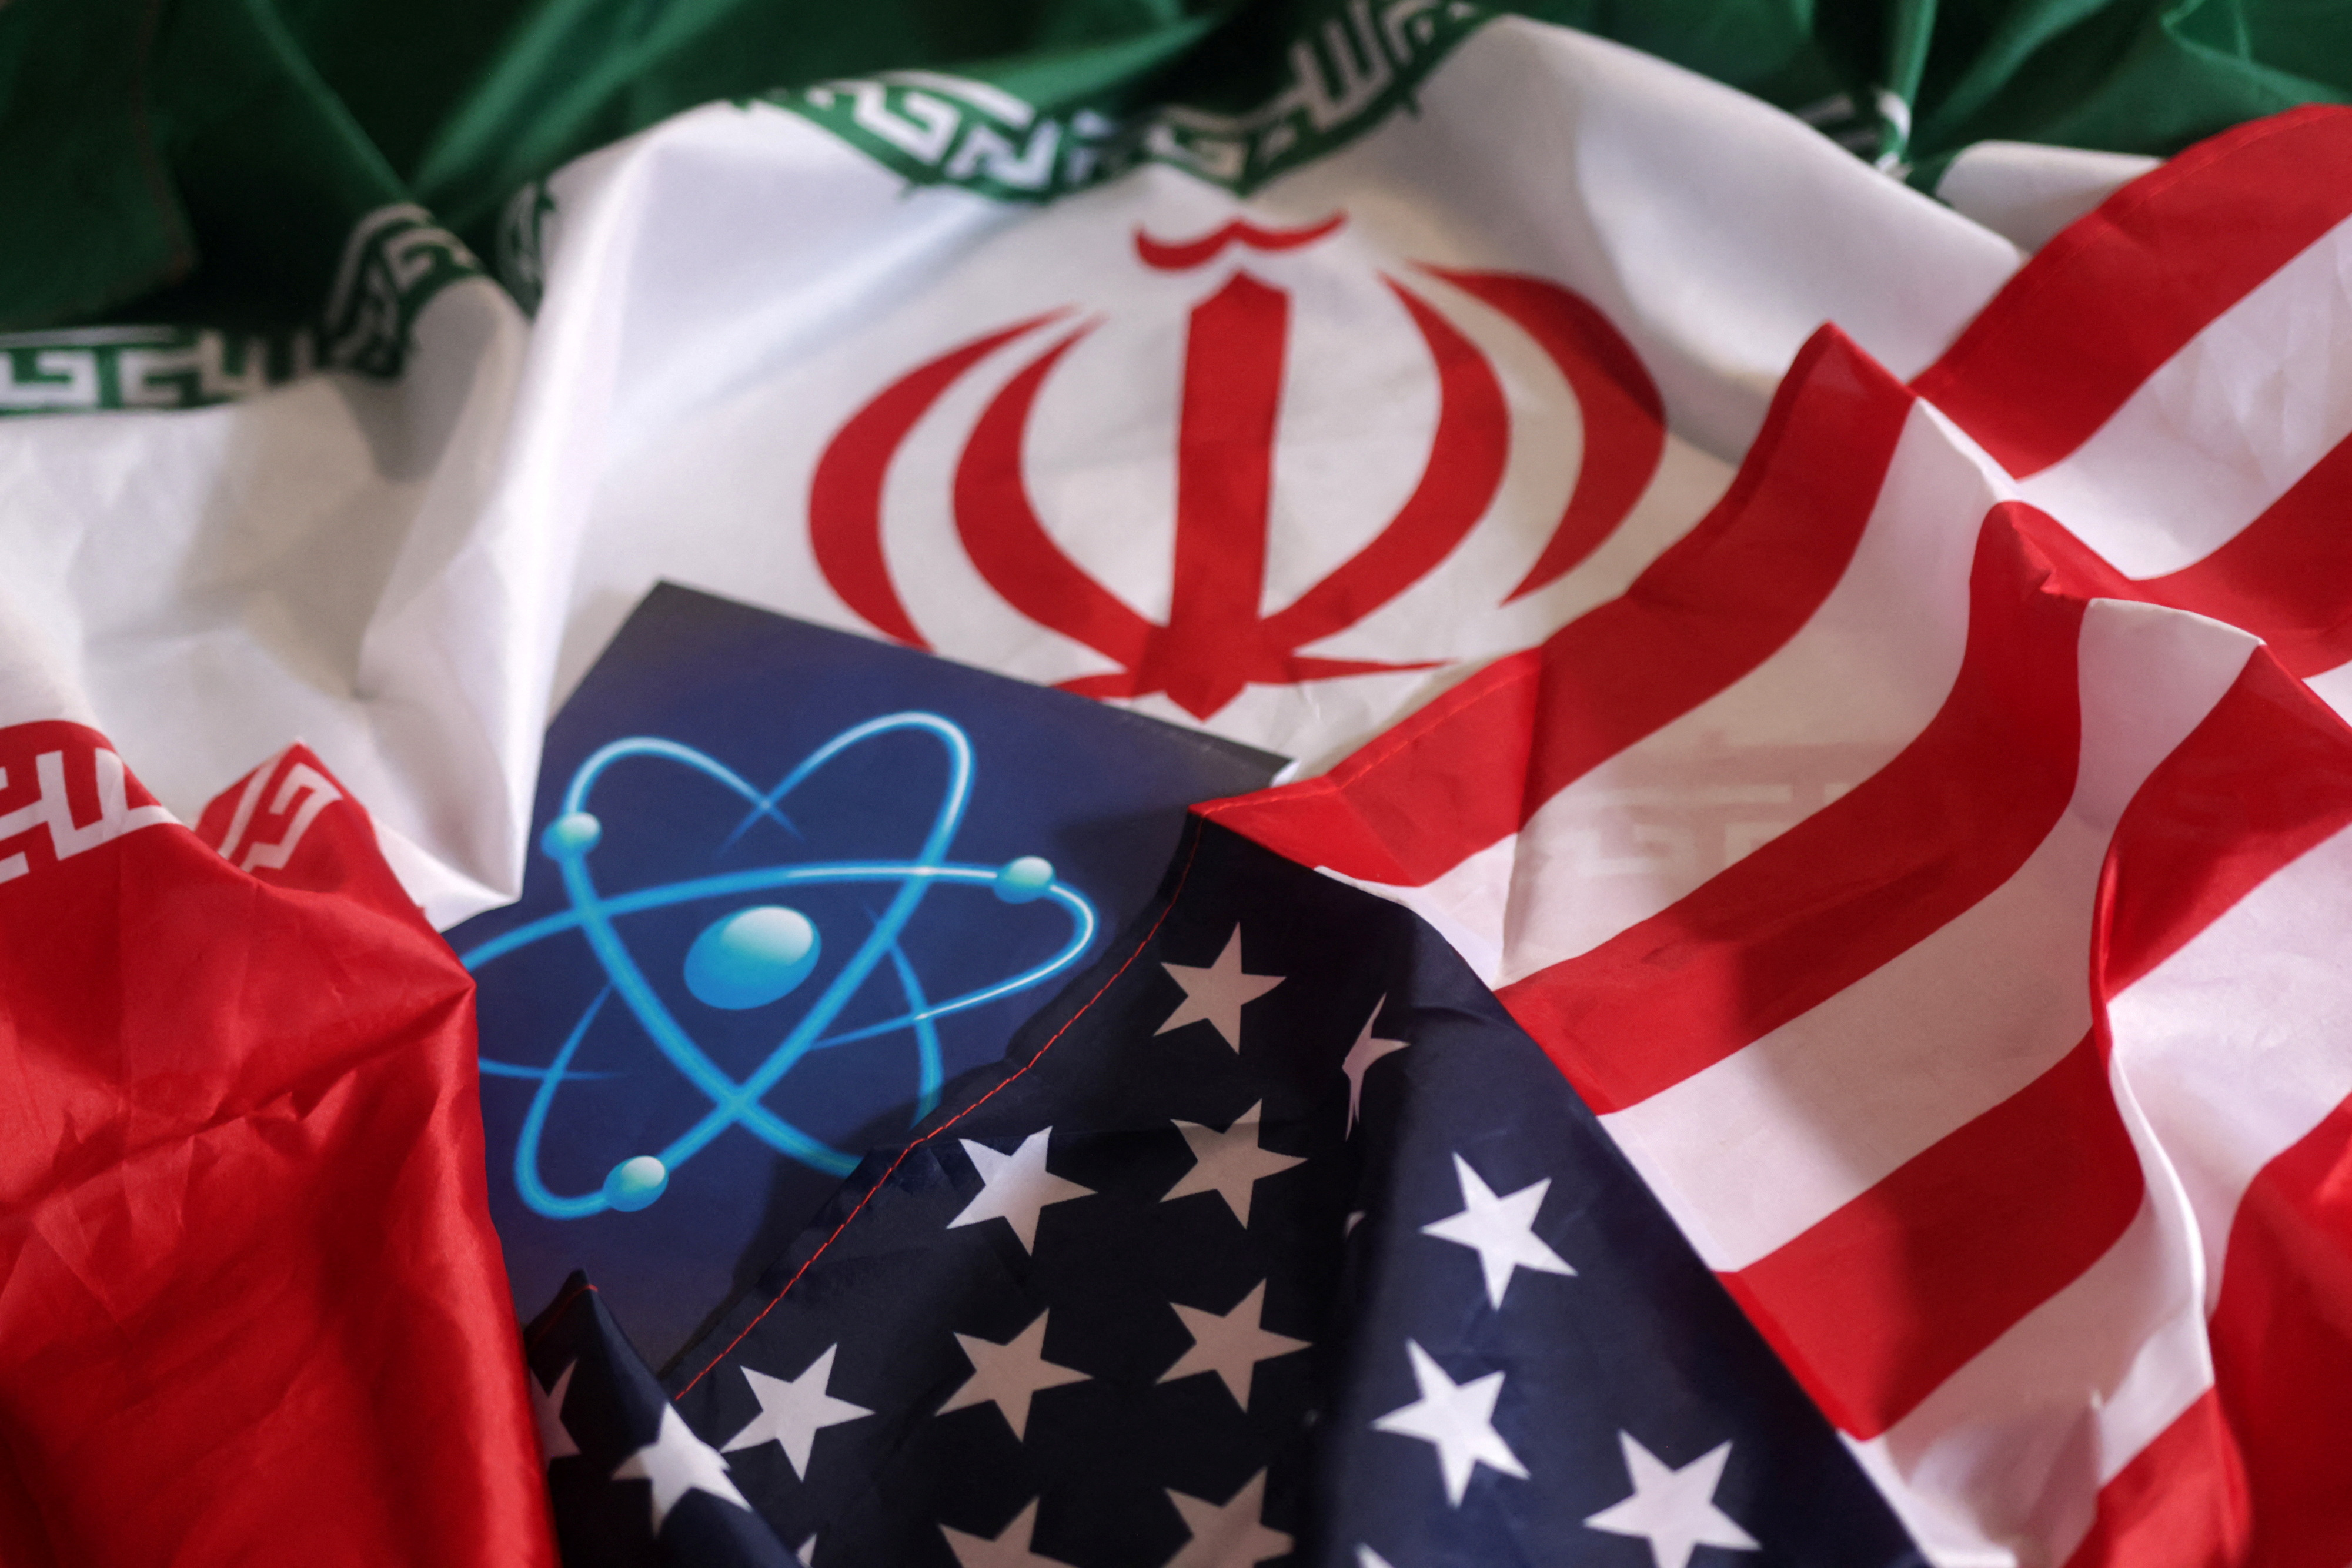 Illustration shows atomic symbol and USA and Iranian flags